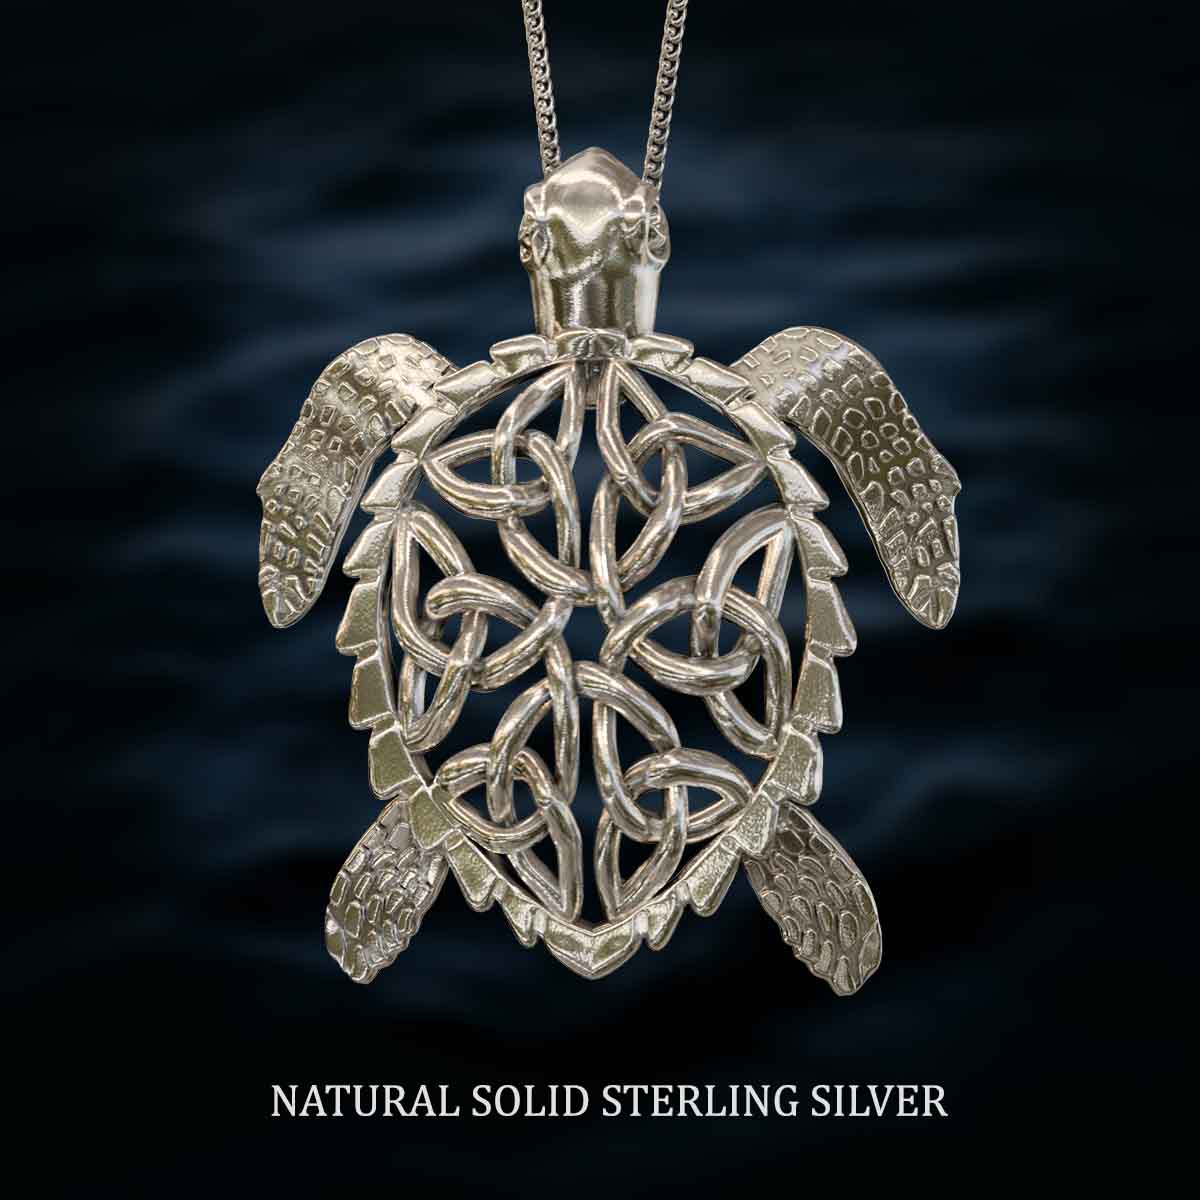     Natural-Satin-Polish-Solid-Sterling-Silver-Celtic-Sea-Turtle-Pendant-Jewelry-For-Necklace